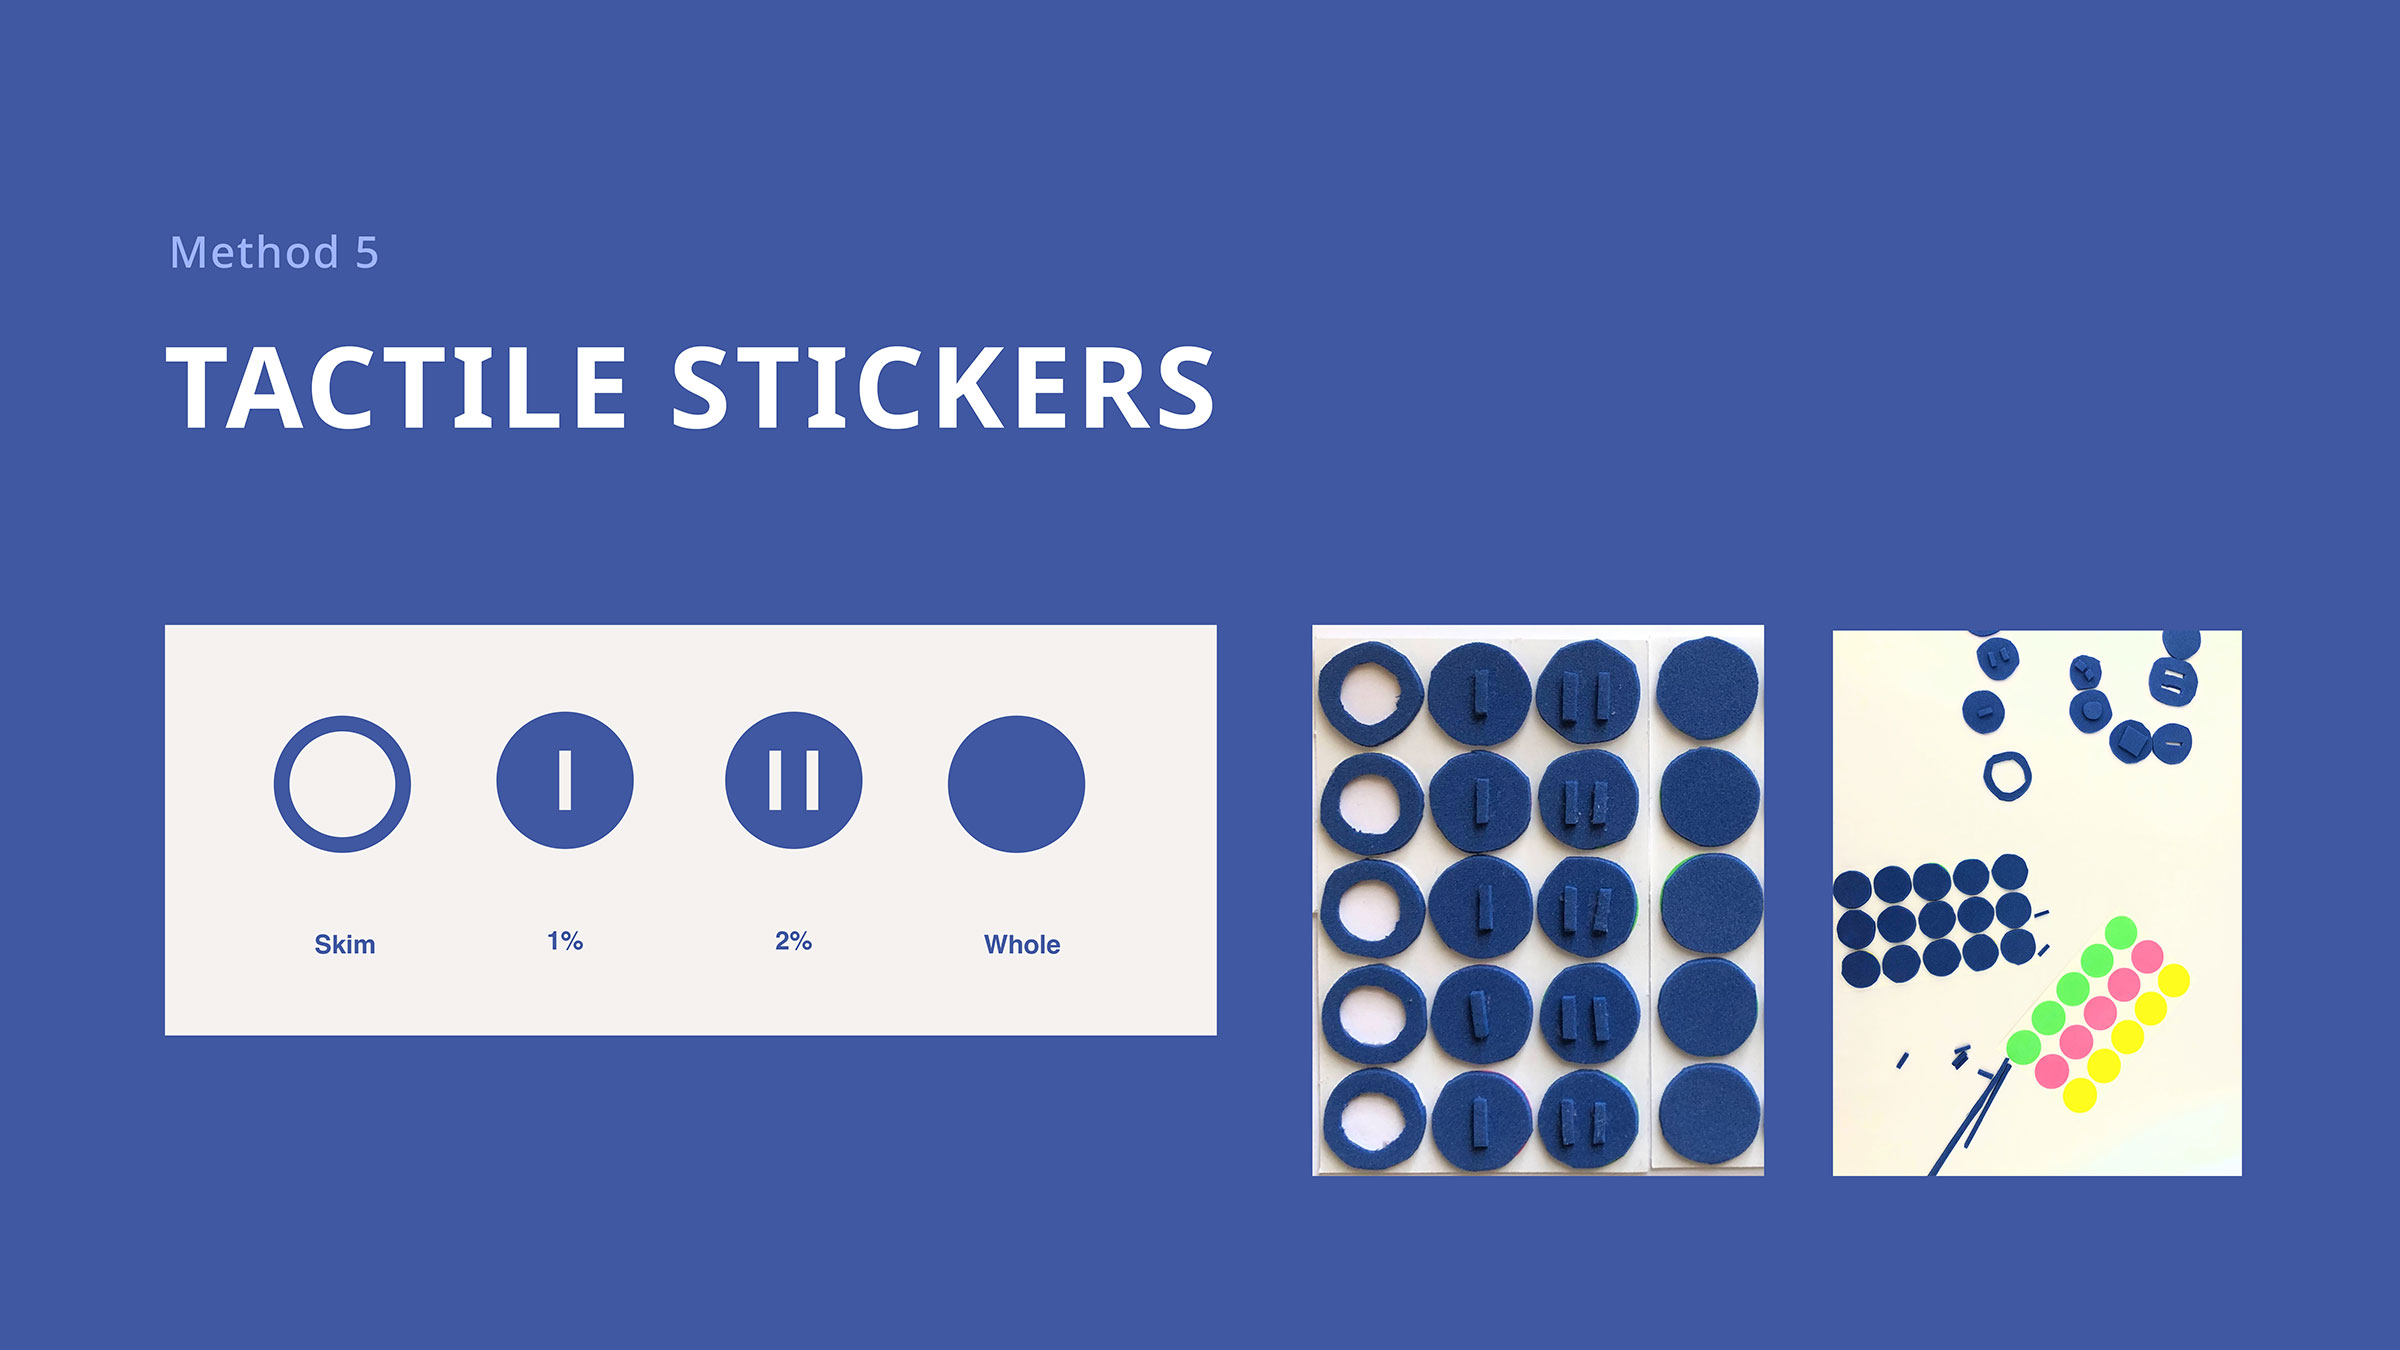 Method 5: Tactile Stickers. A system of four tactile stickers is shown to differentiate between types of milk.